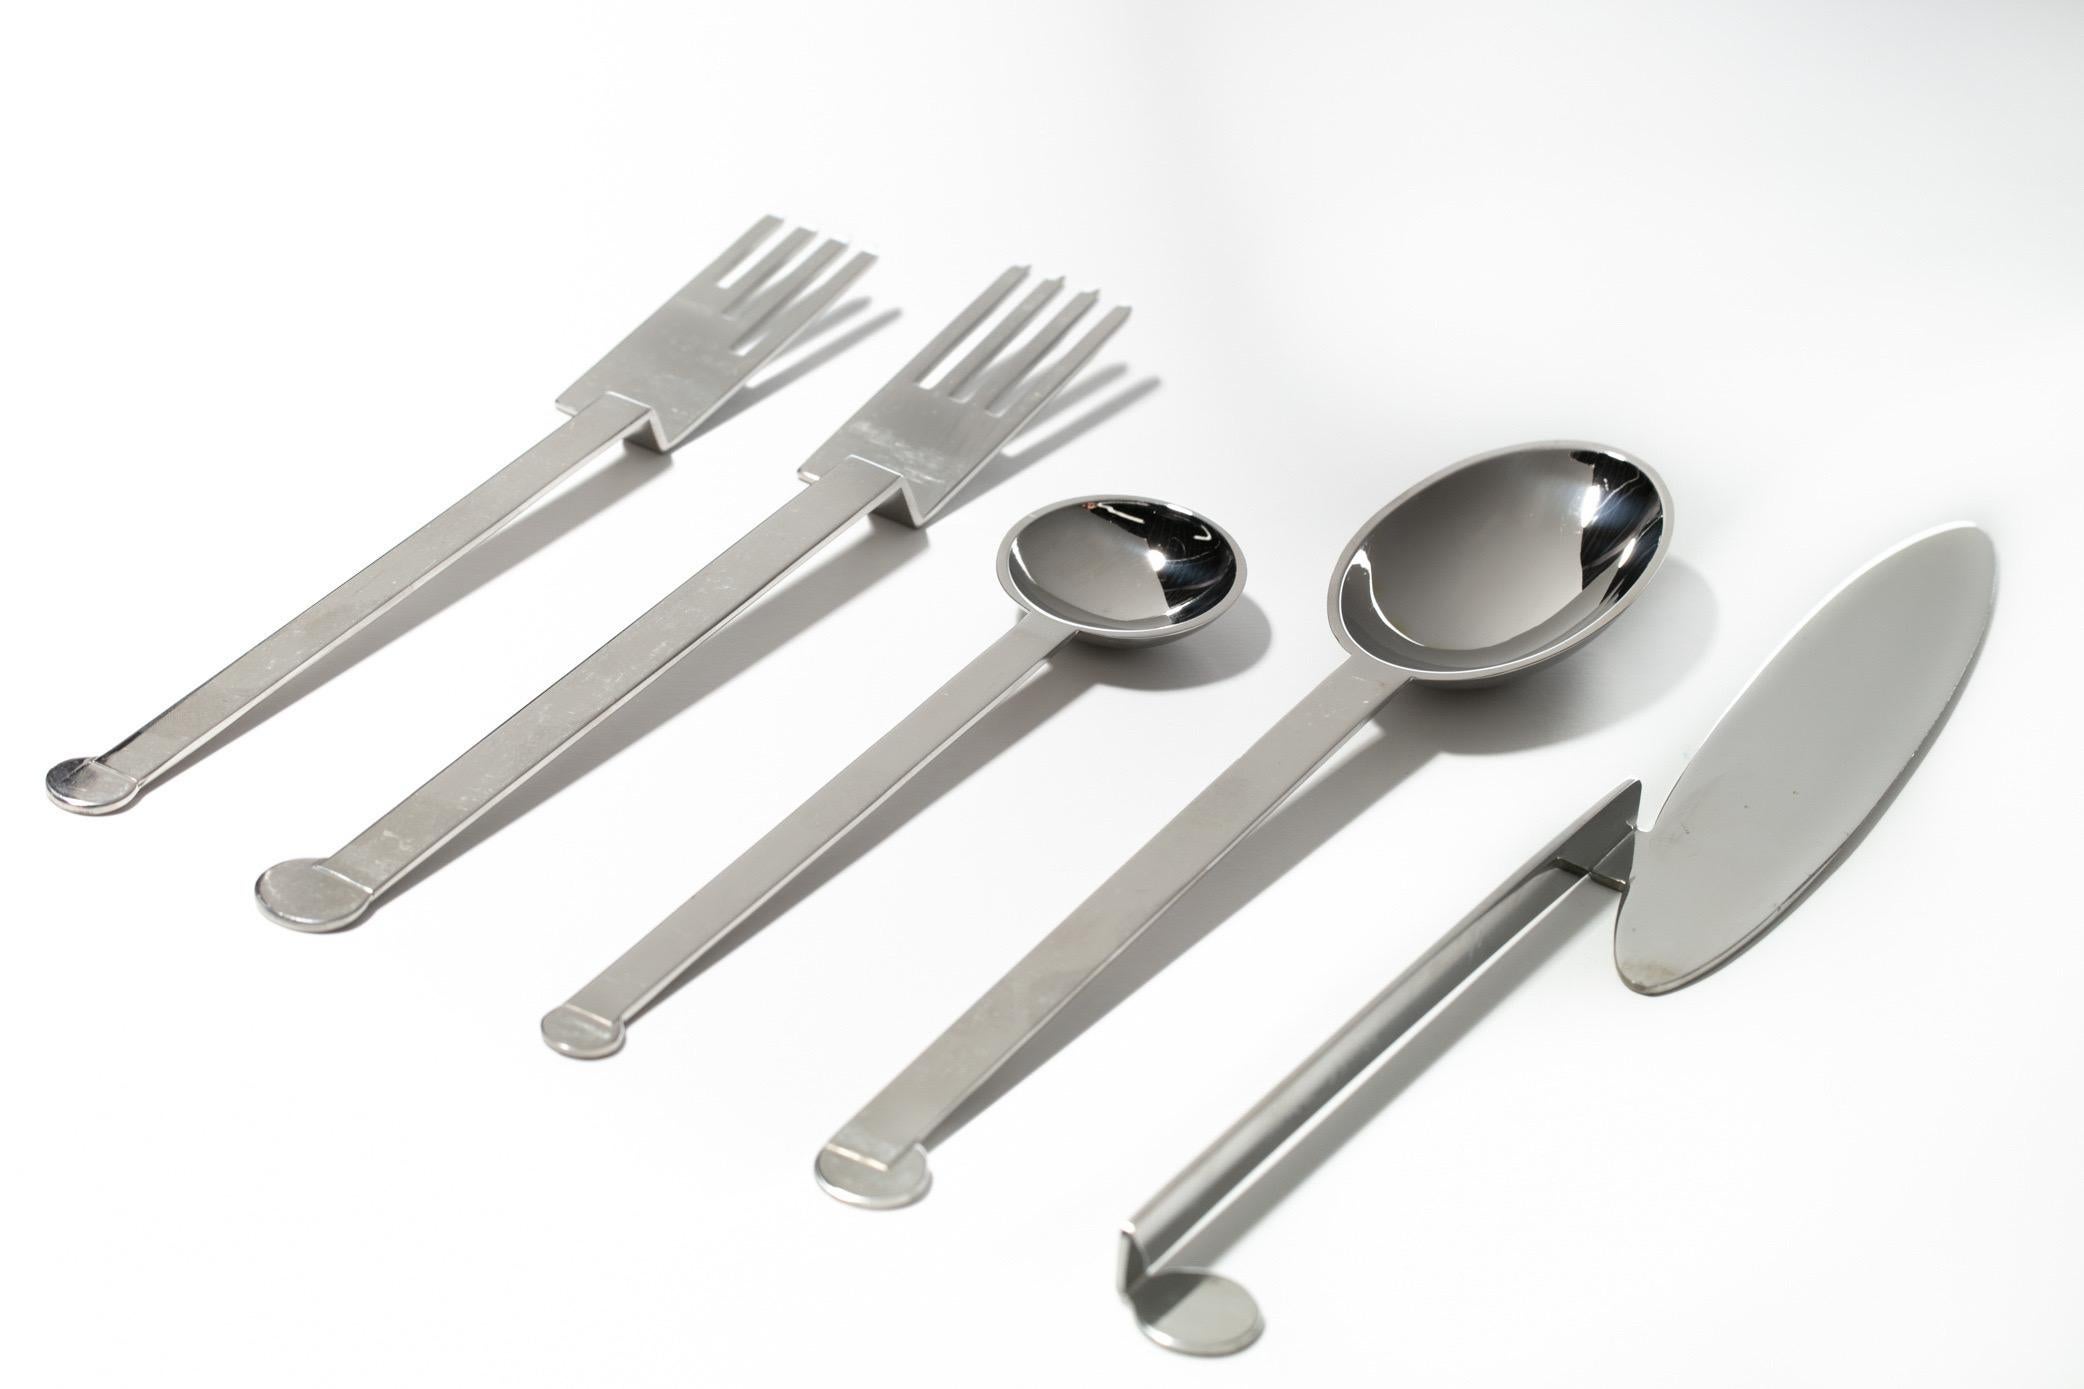 Xum pattern Bissell and Wilhite (Japan) Post Modern Design stainless steel flatware c. 1990. Flatware set of 50 pieces total - 5 piece place setting for 10. With its modern lines and geometric handles, this stainless steel flatware pattern is a